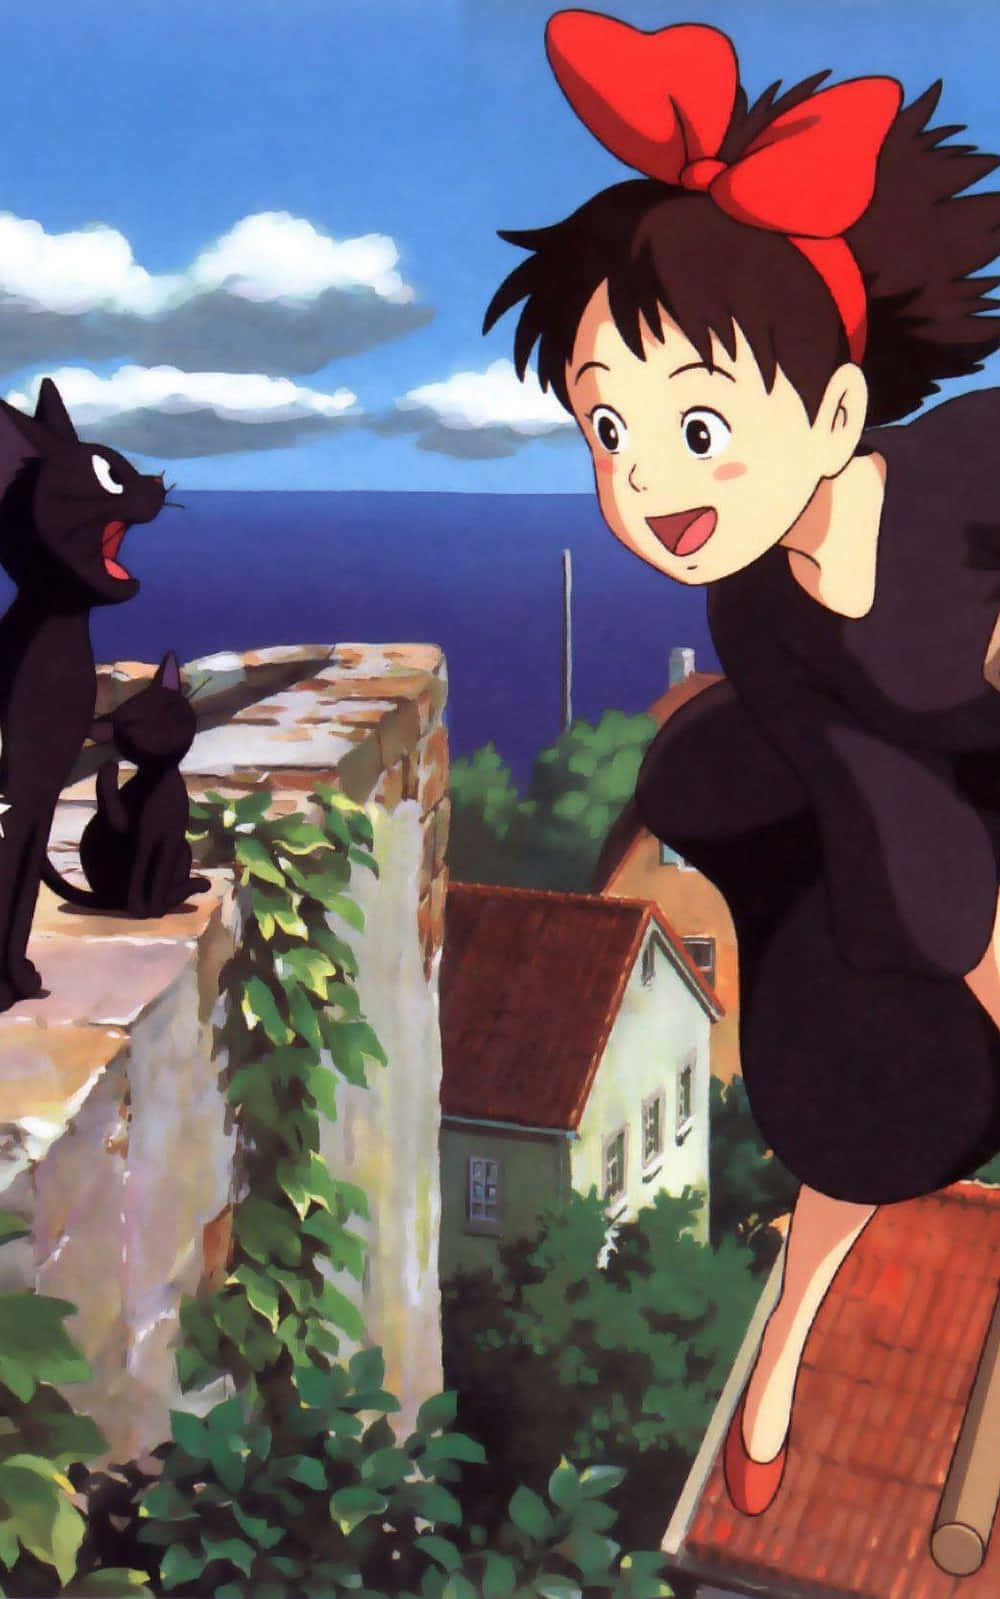 Jiji the Cat from a Japanese Animated Movie, Studio Ghibli Wallpaper